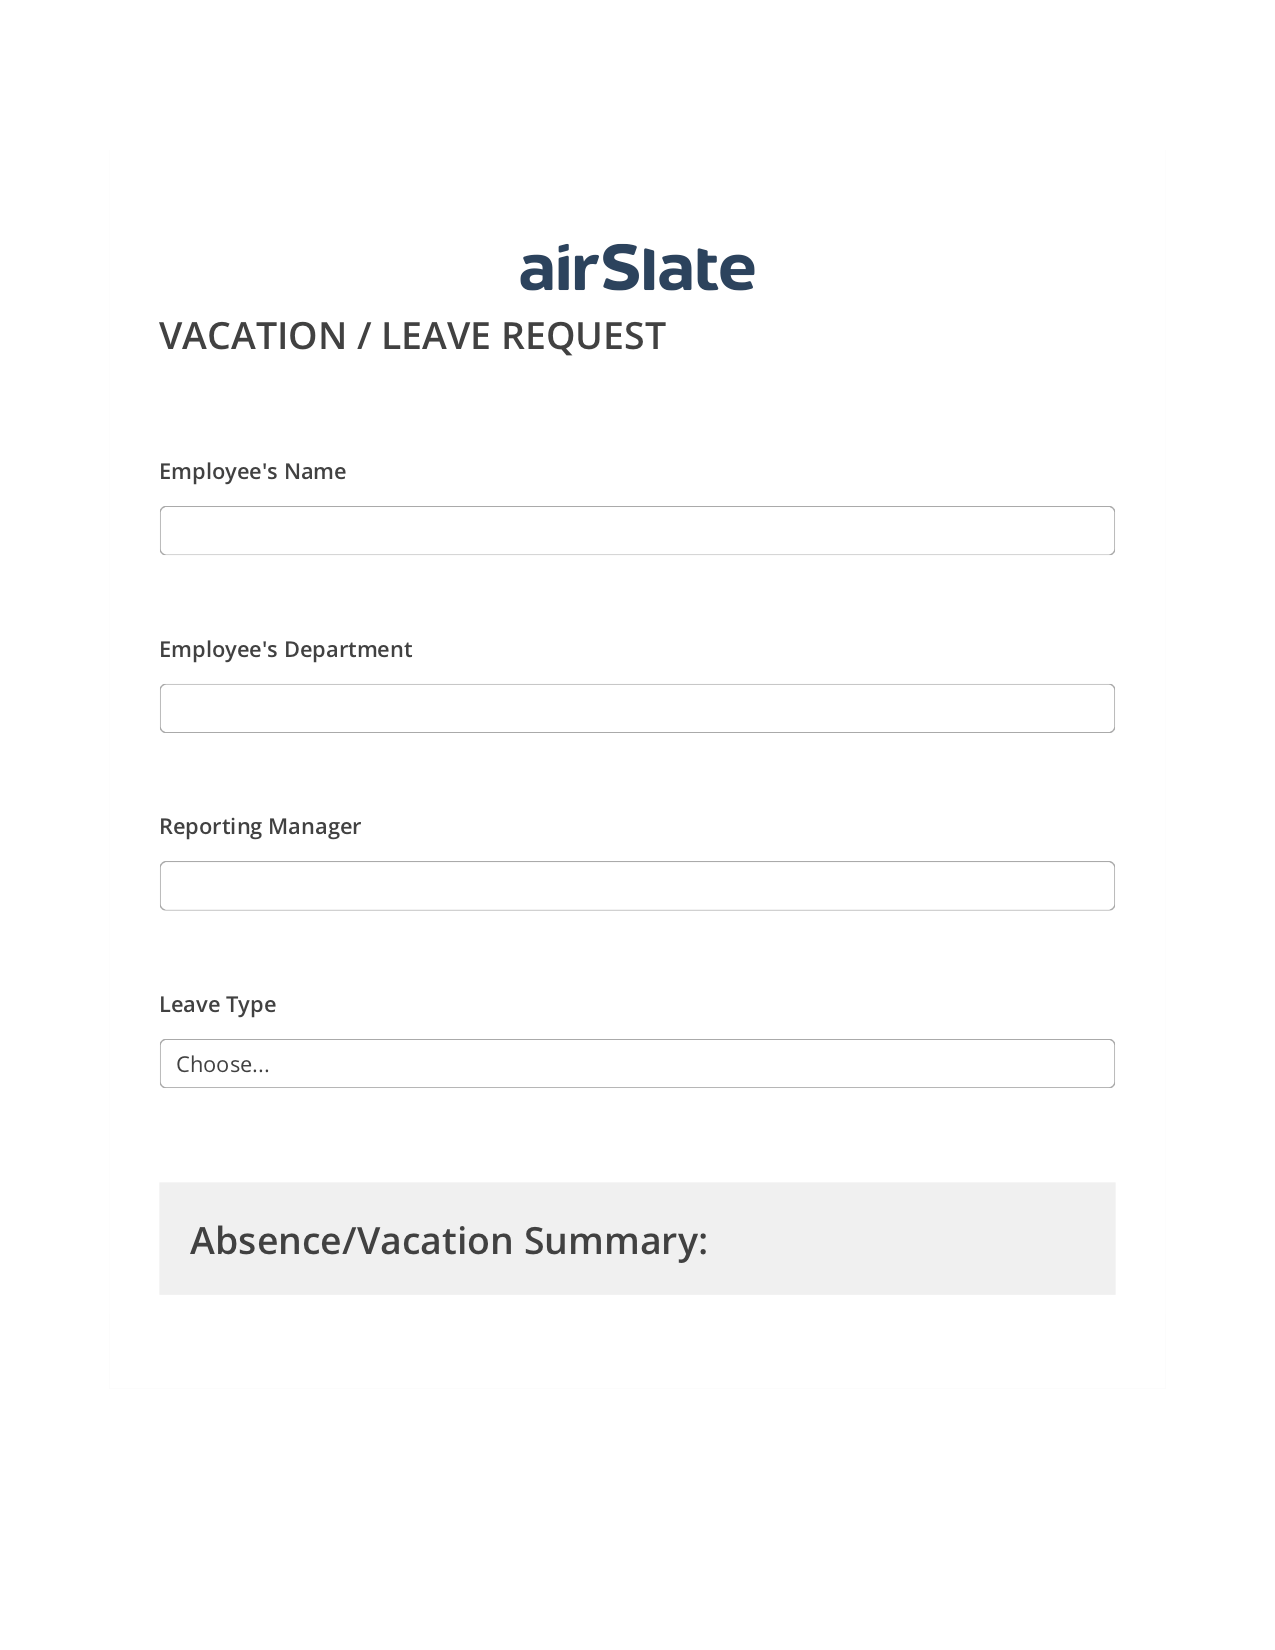 Vacation/Leave Request Workflow Pre-fill Dropdowns from Excel Bot, Lock the Slate Bot, Export to Excel 365 Bot